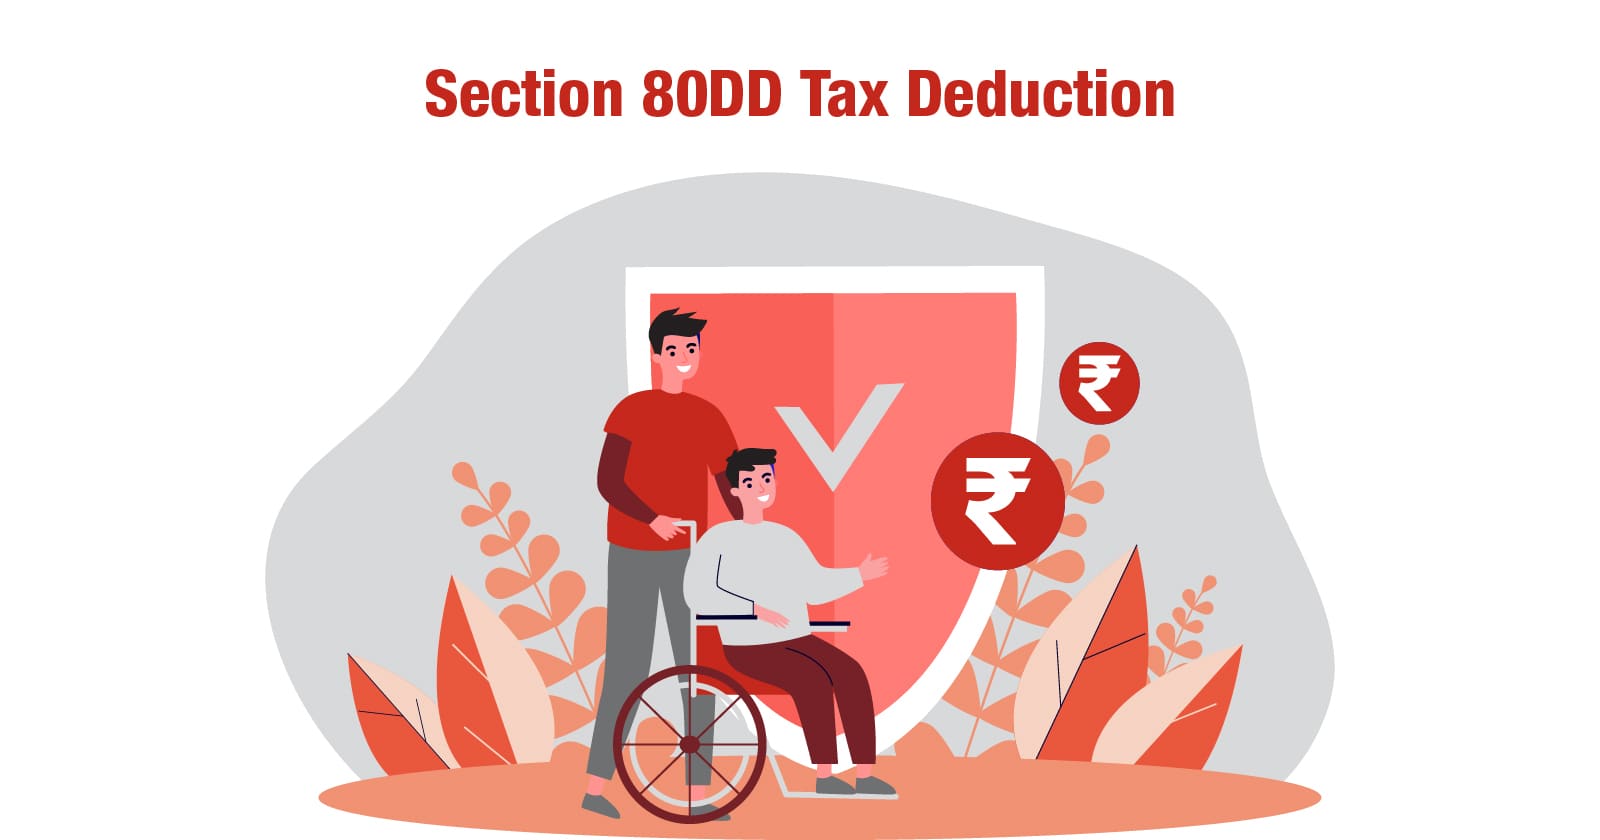 Section 80DD Deductions Claim Tax Deduction On Medical Expenses Of 